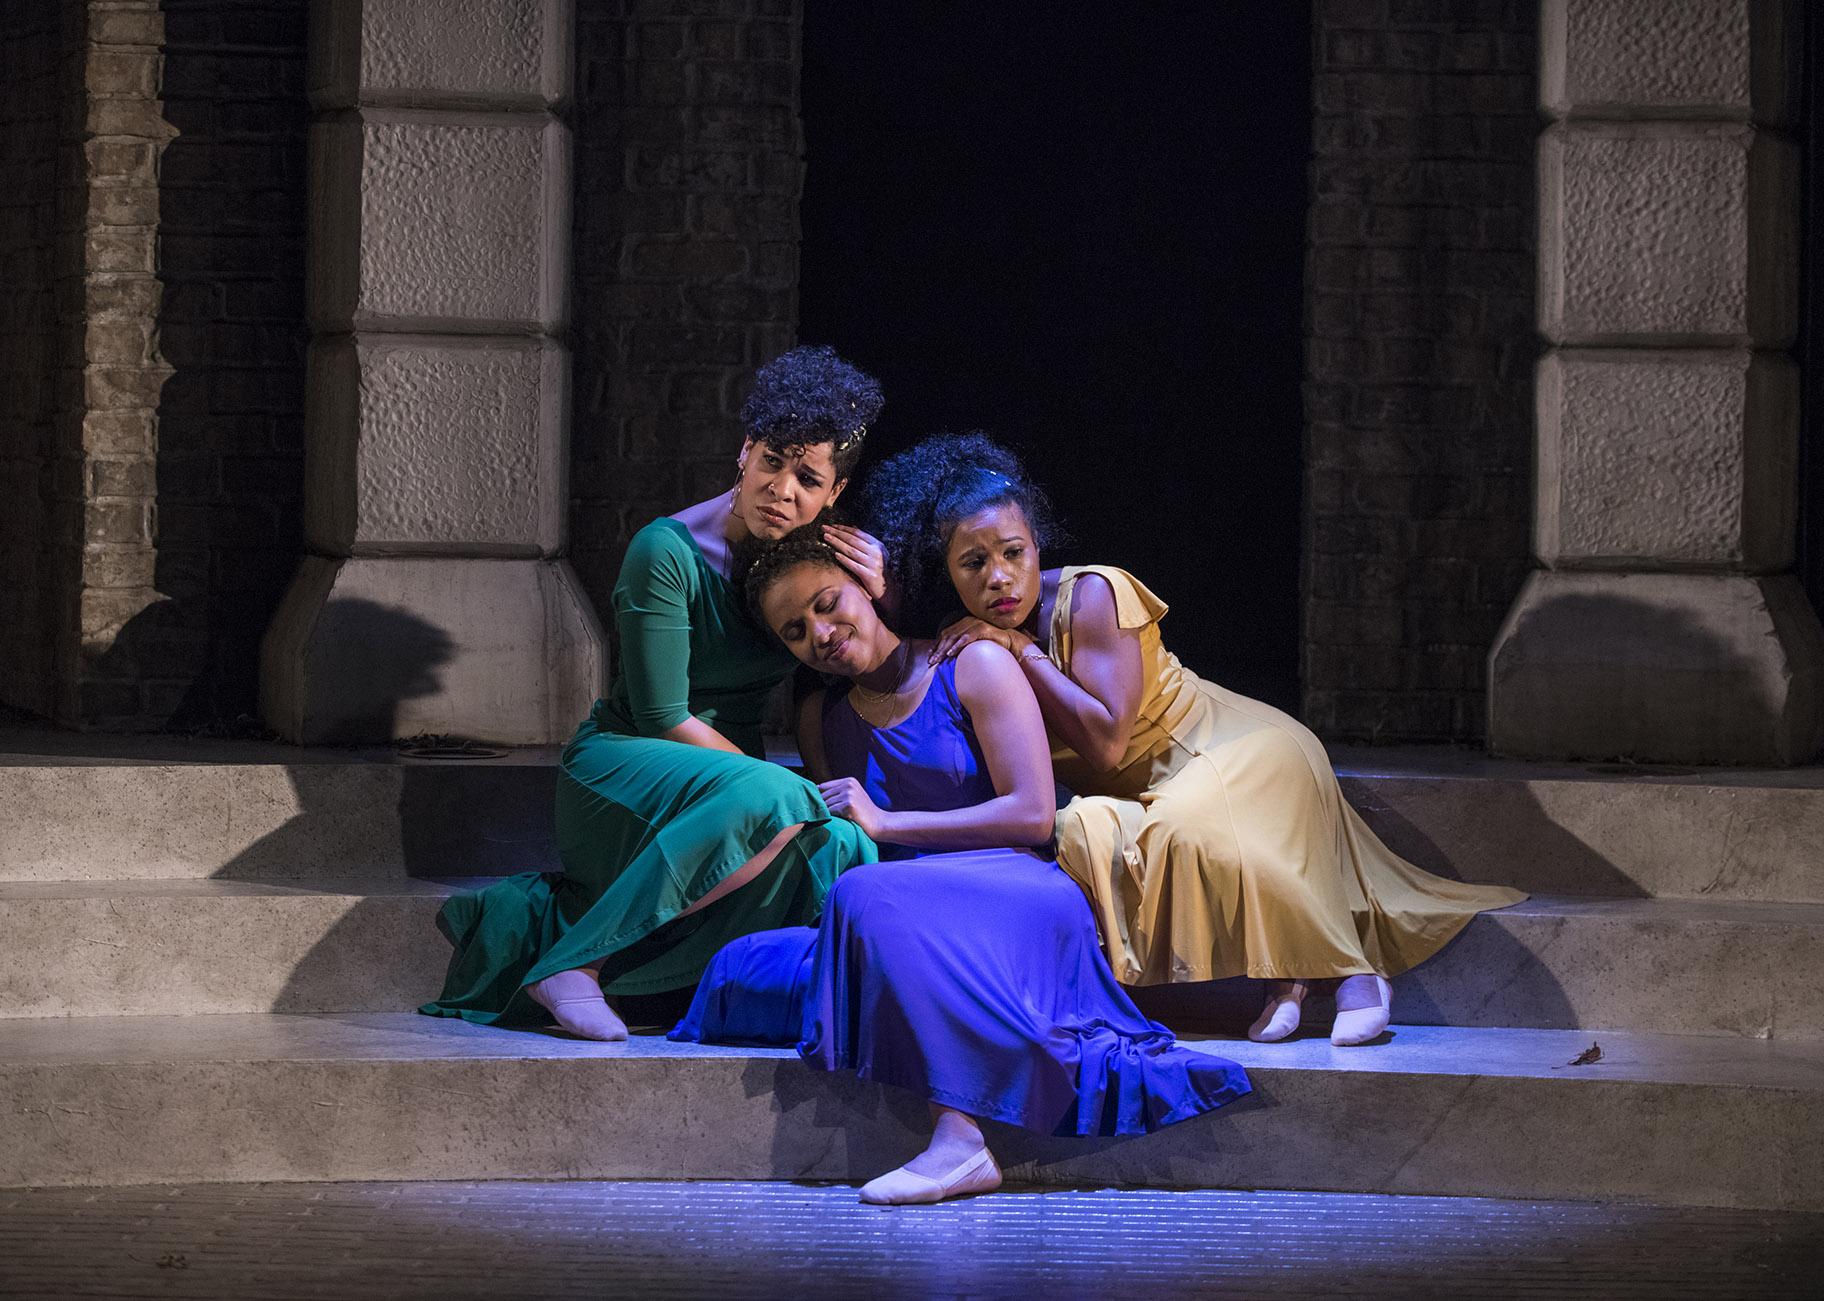 Angelica Katie, Leah Casey and Melanie Brezill in Court Theatre’s production of “For Colored Girls Who Have Considered Suicide/When the Rainbow Was Enuf.” (Photo by Michael Brosilow)